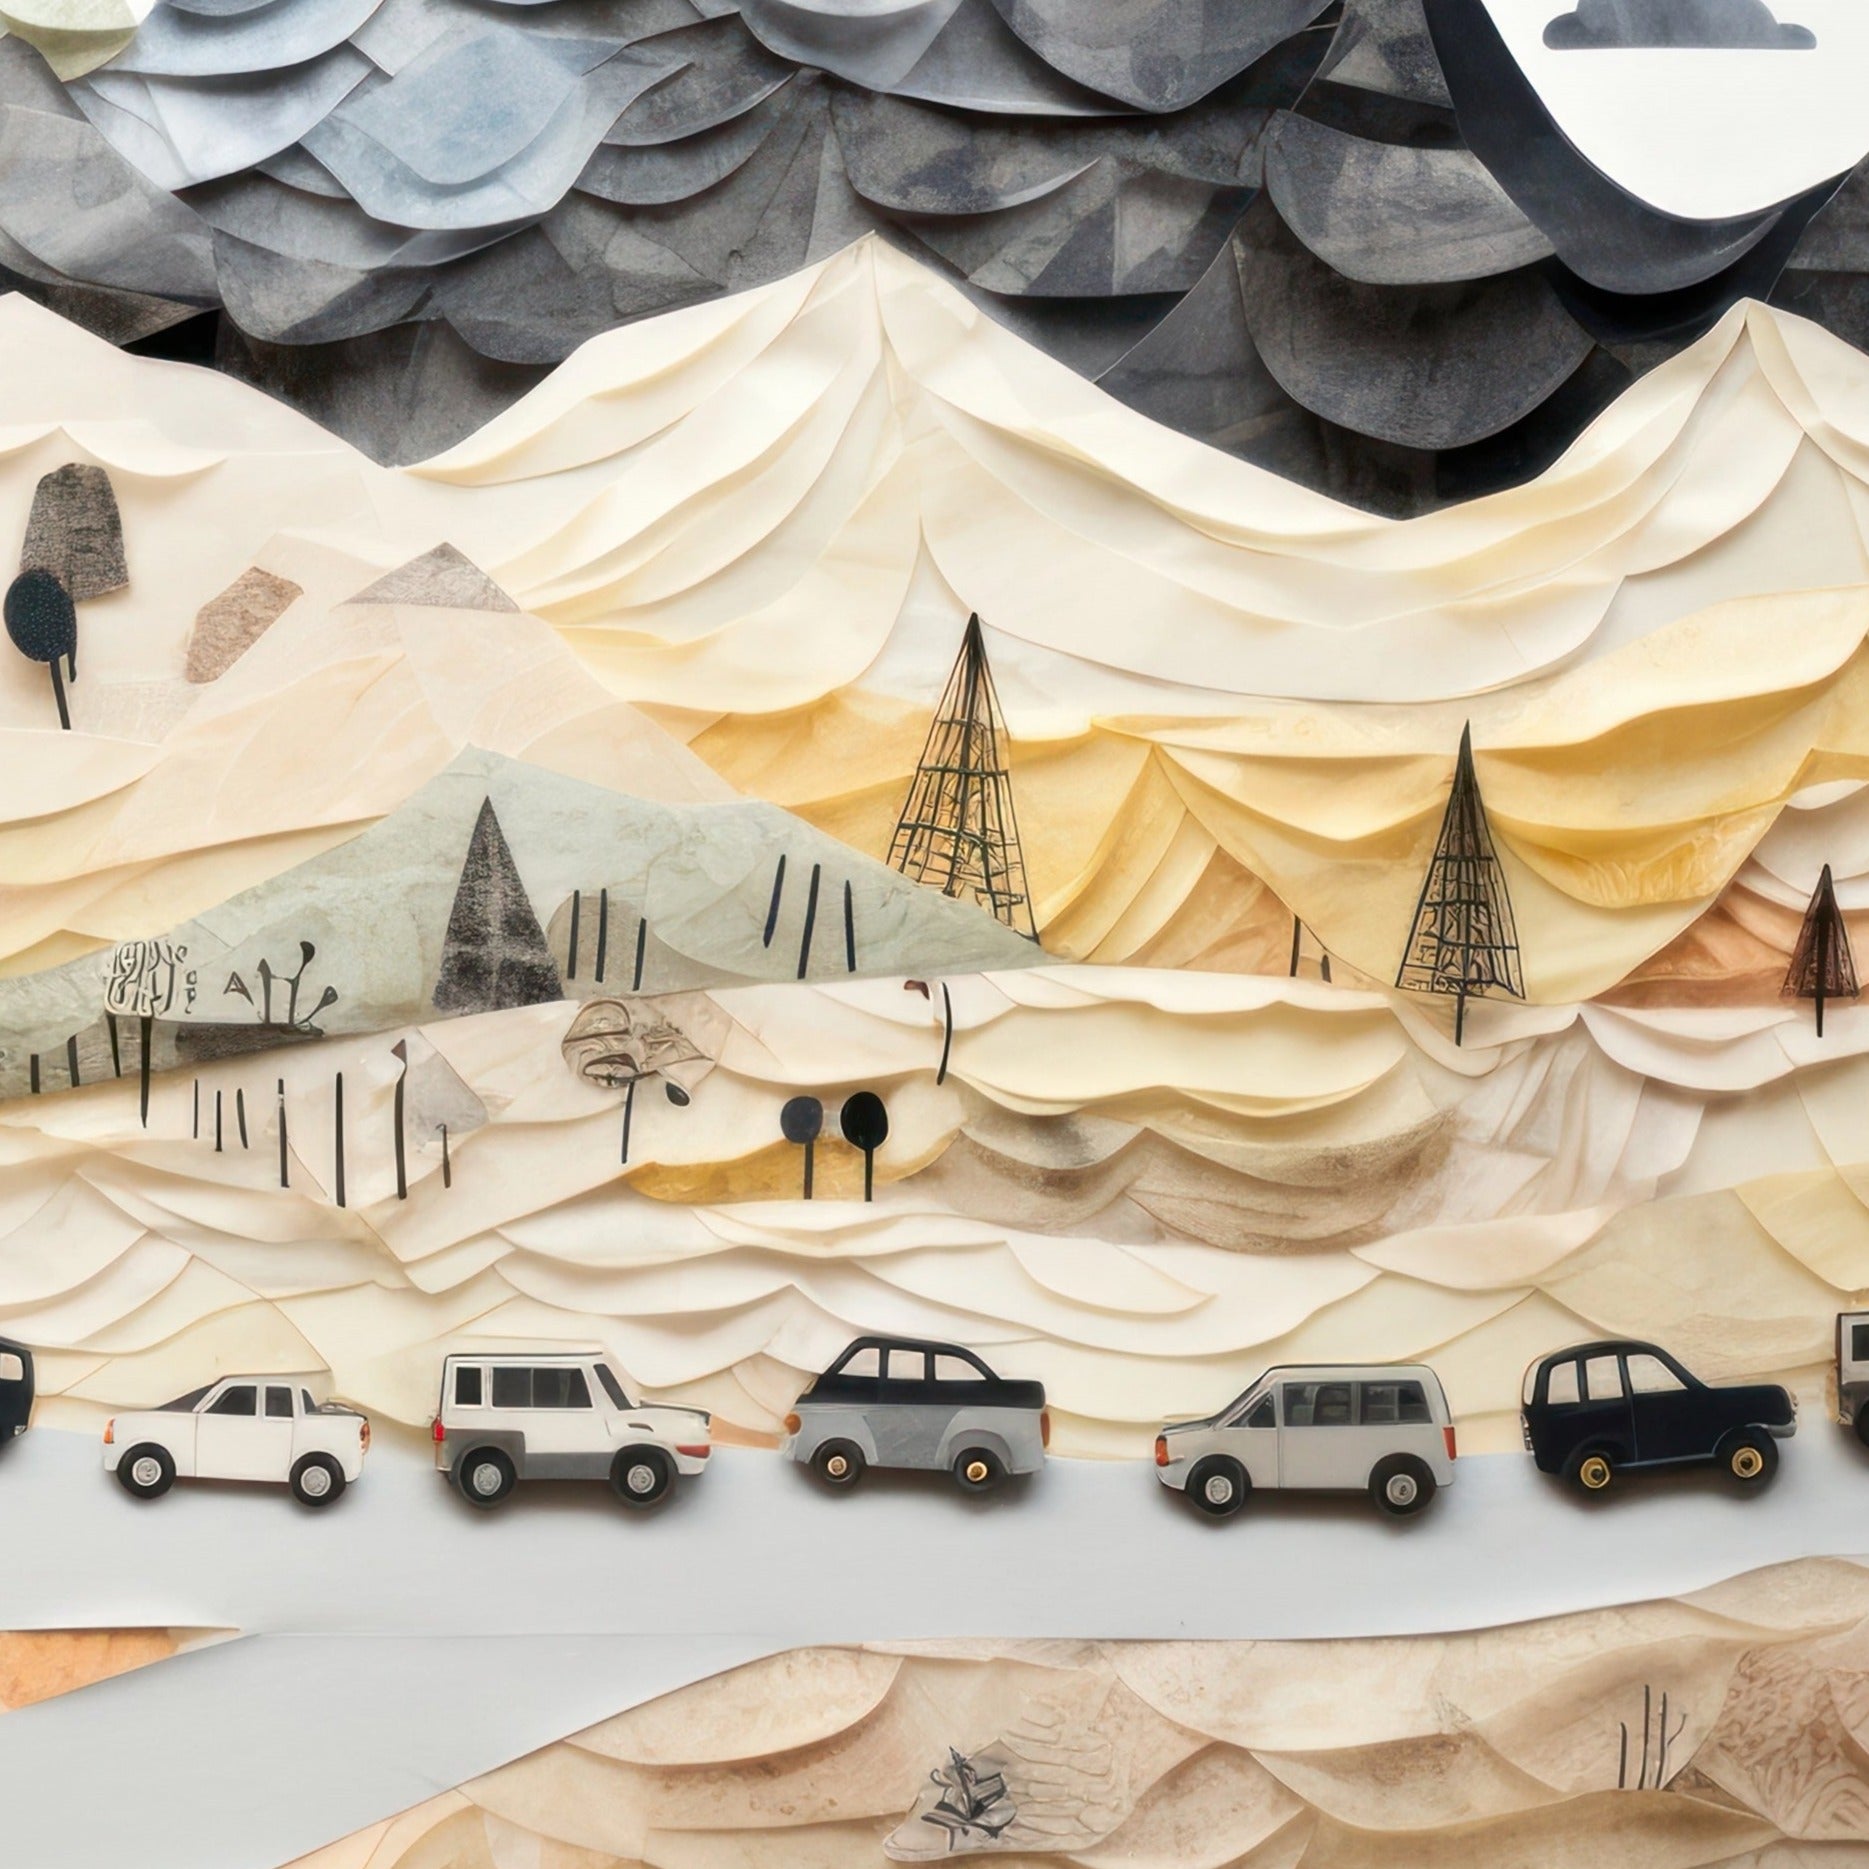 "Creative Mountain Landscape Wall Mural in Kid's Room with Playful Road and Car Theme"